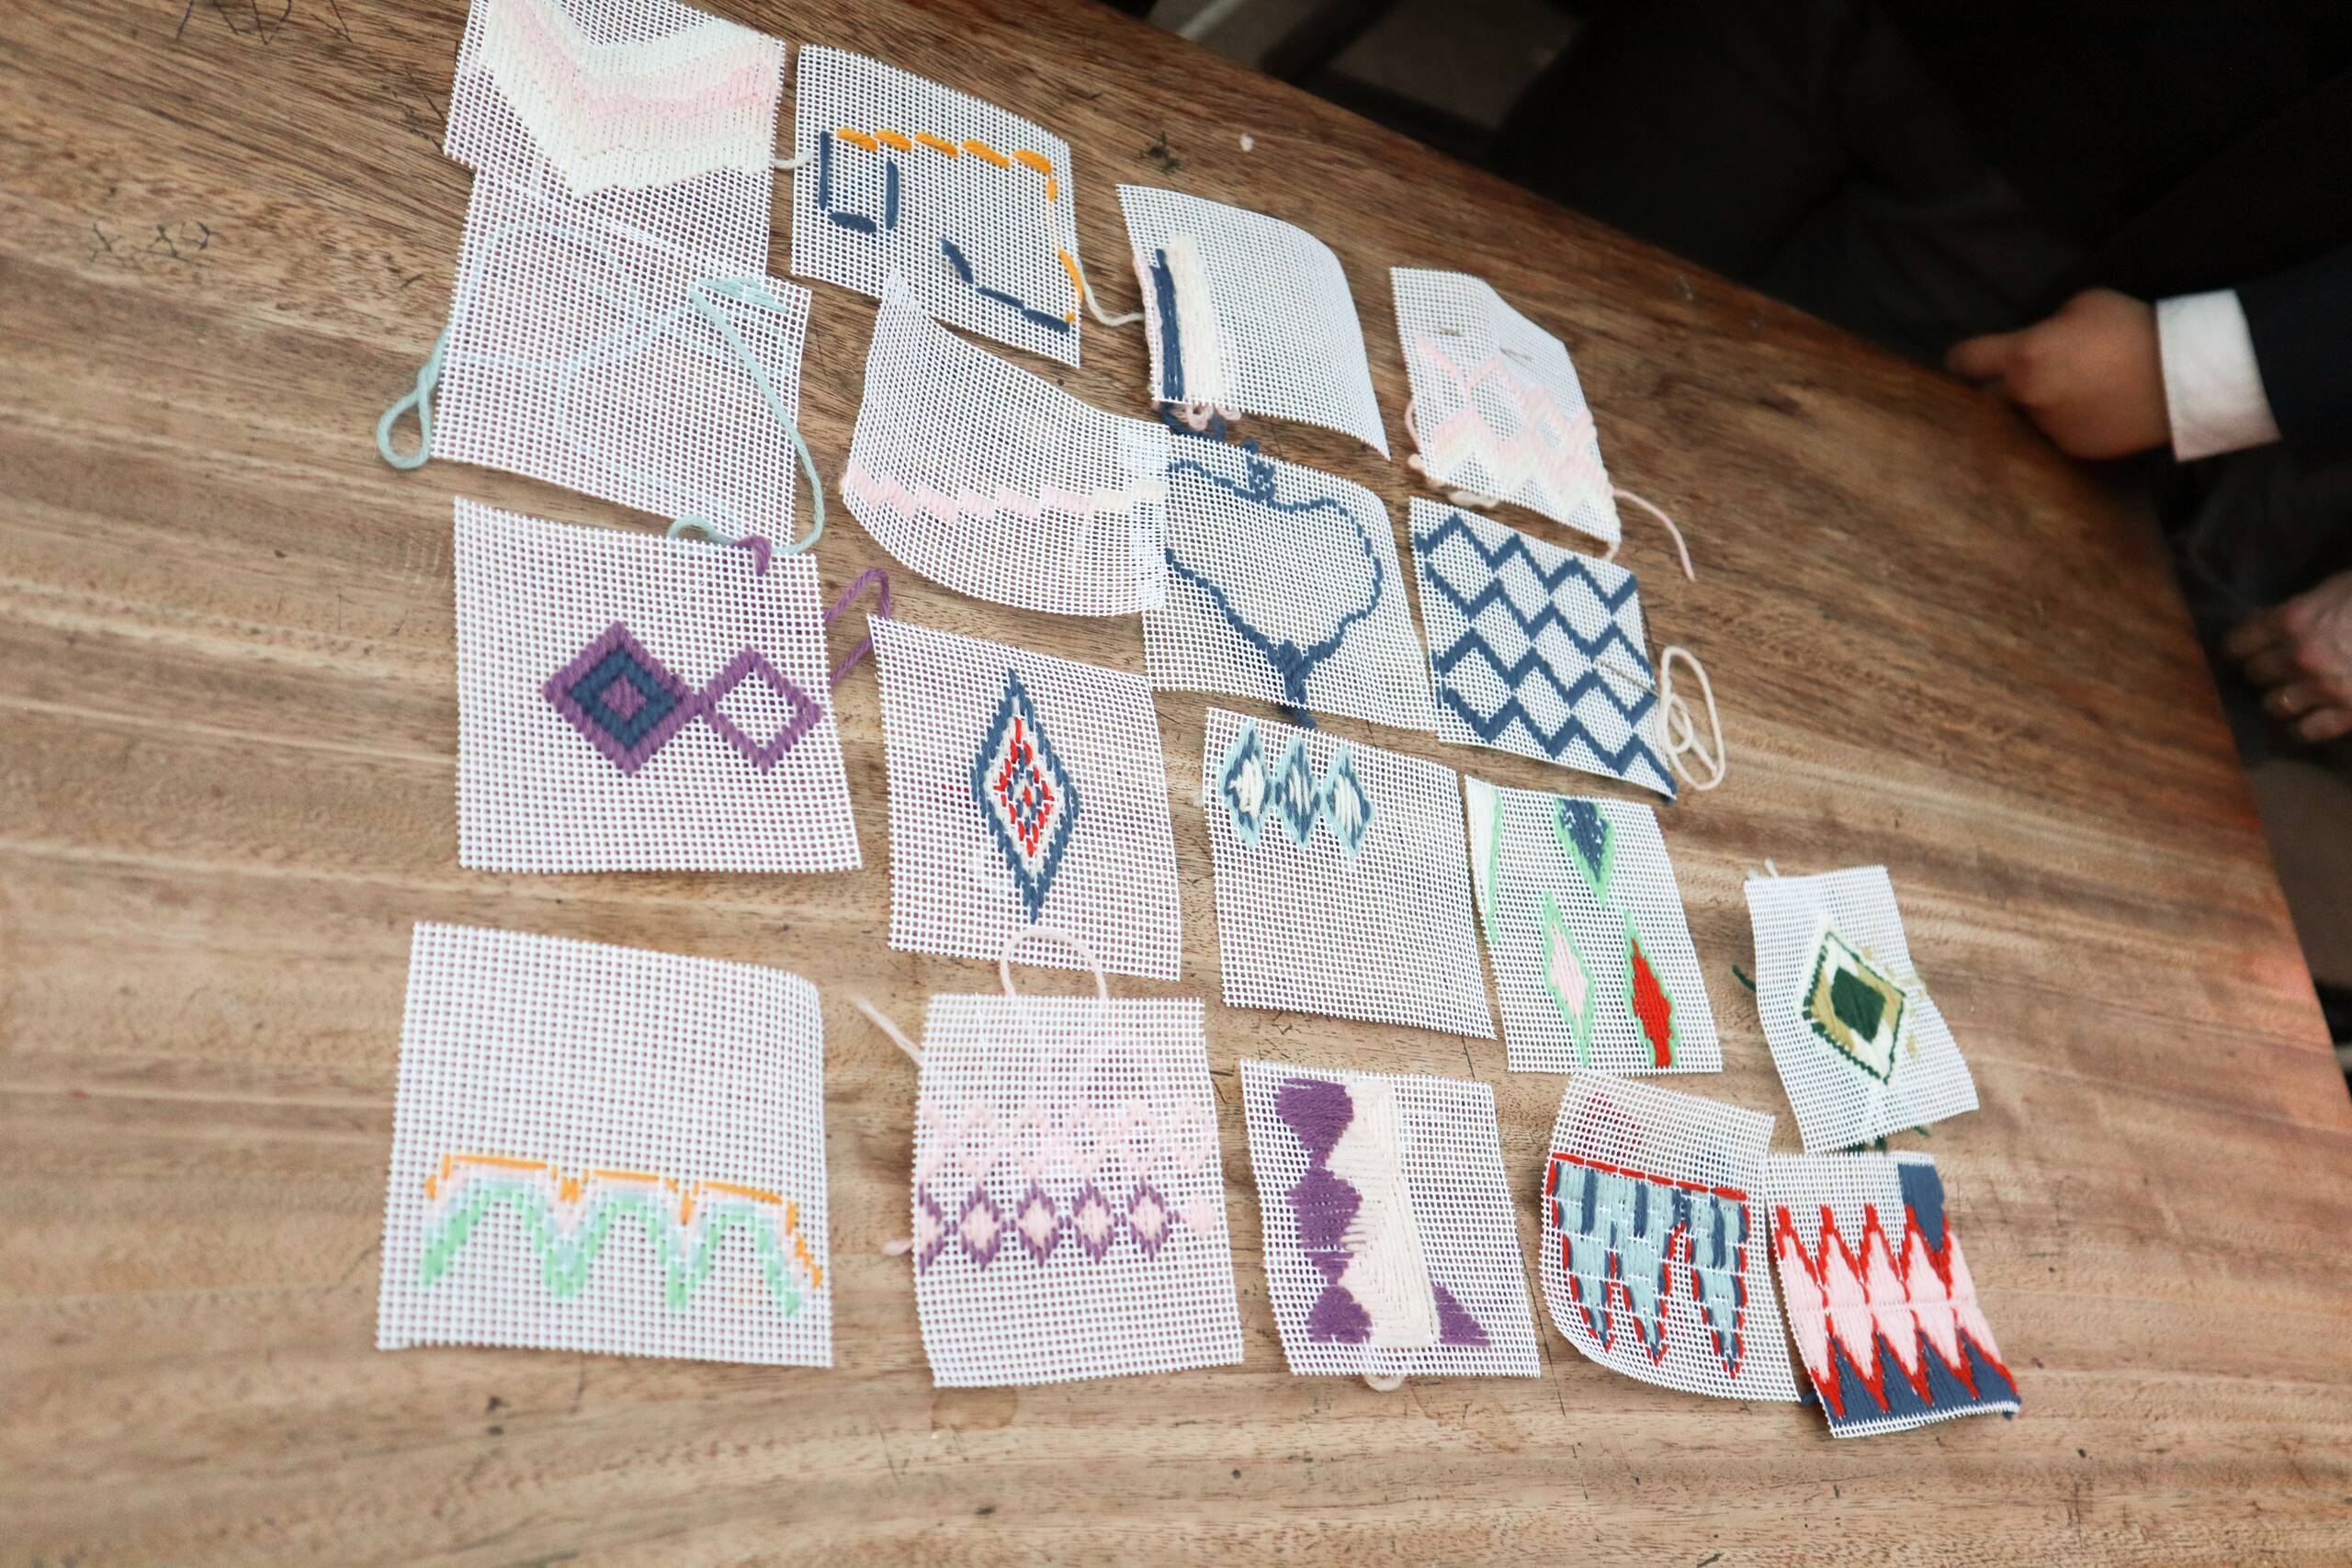 Youth workshop, Bargello workshop with secondary school students held at Jerwood Arts, London UK, 2022